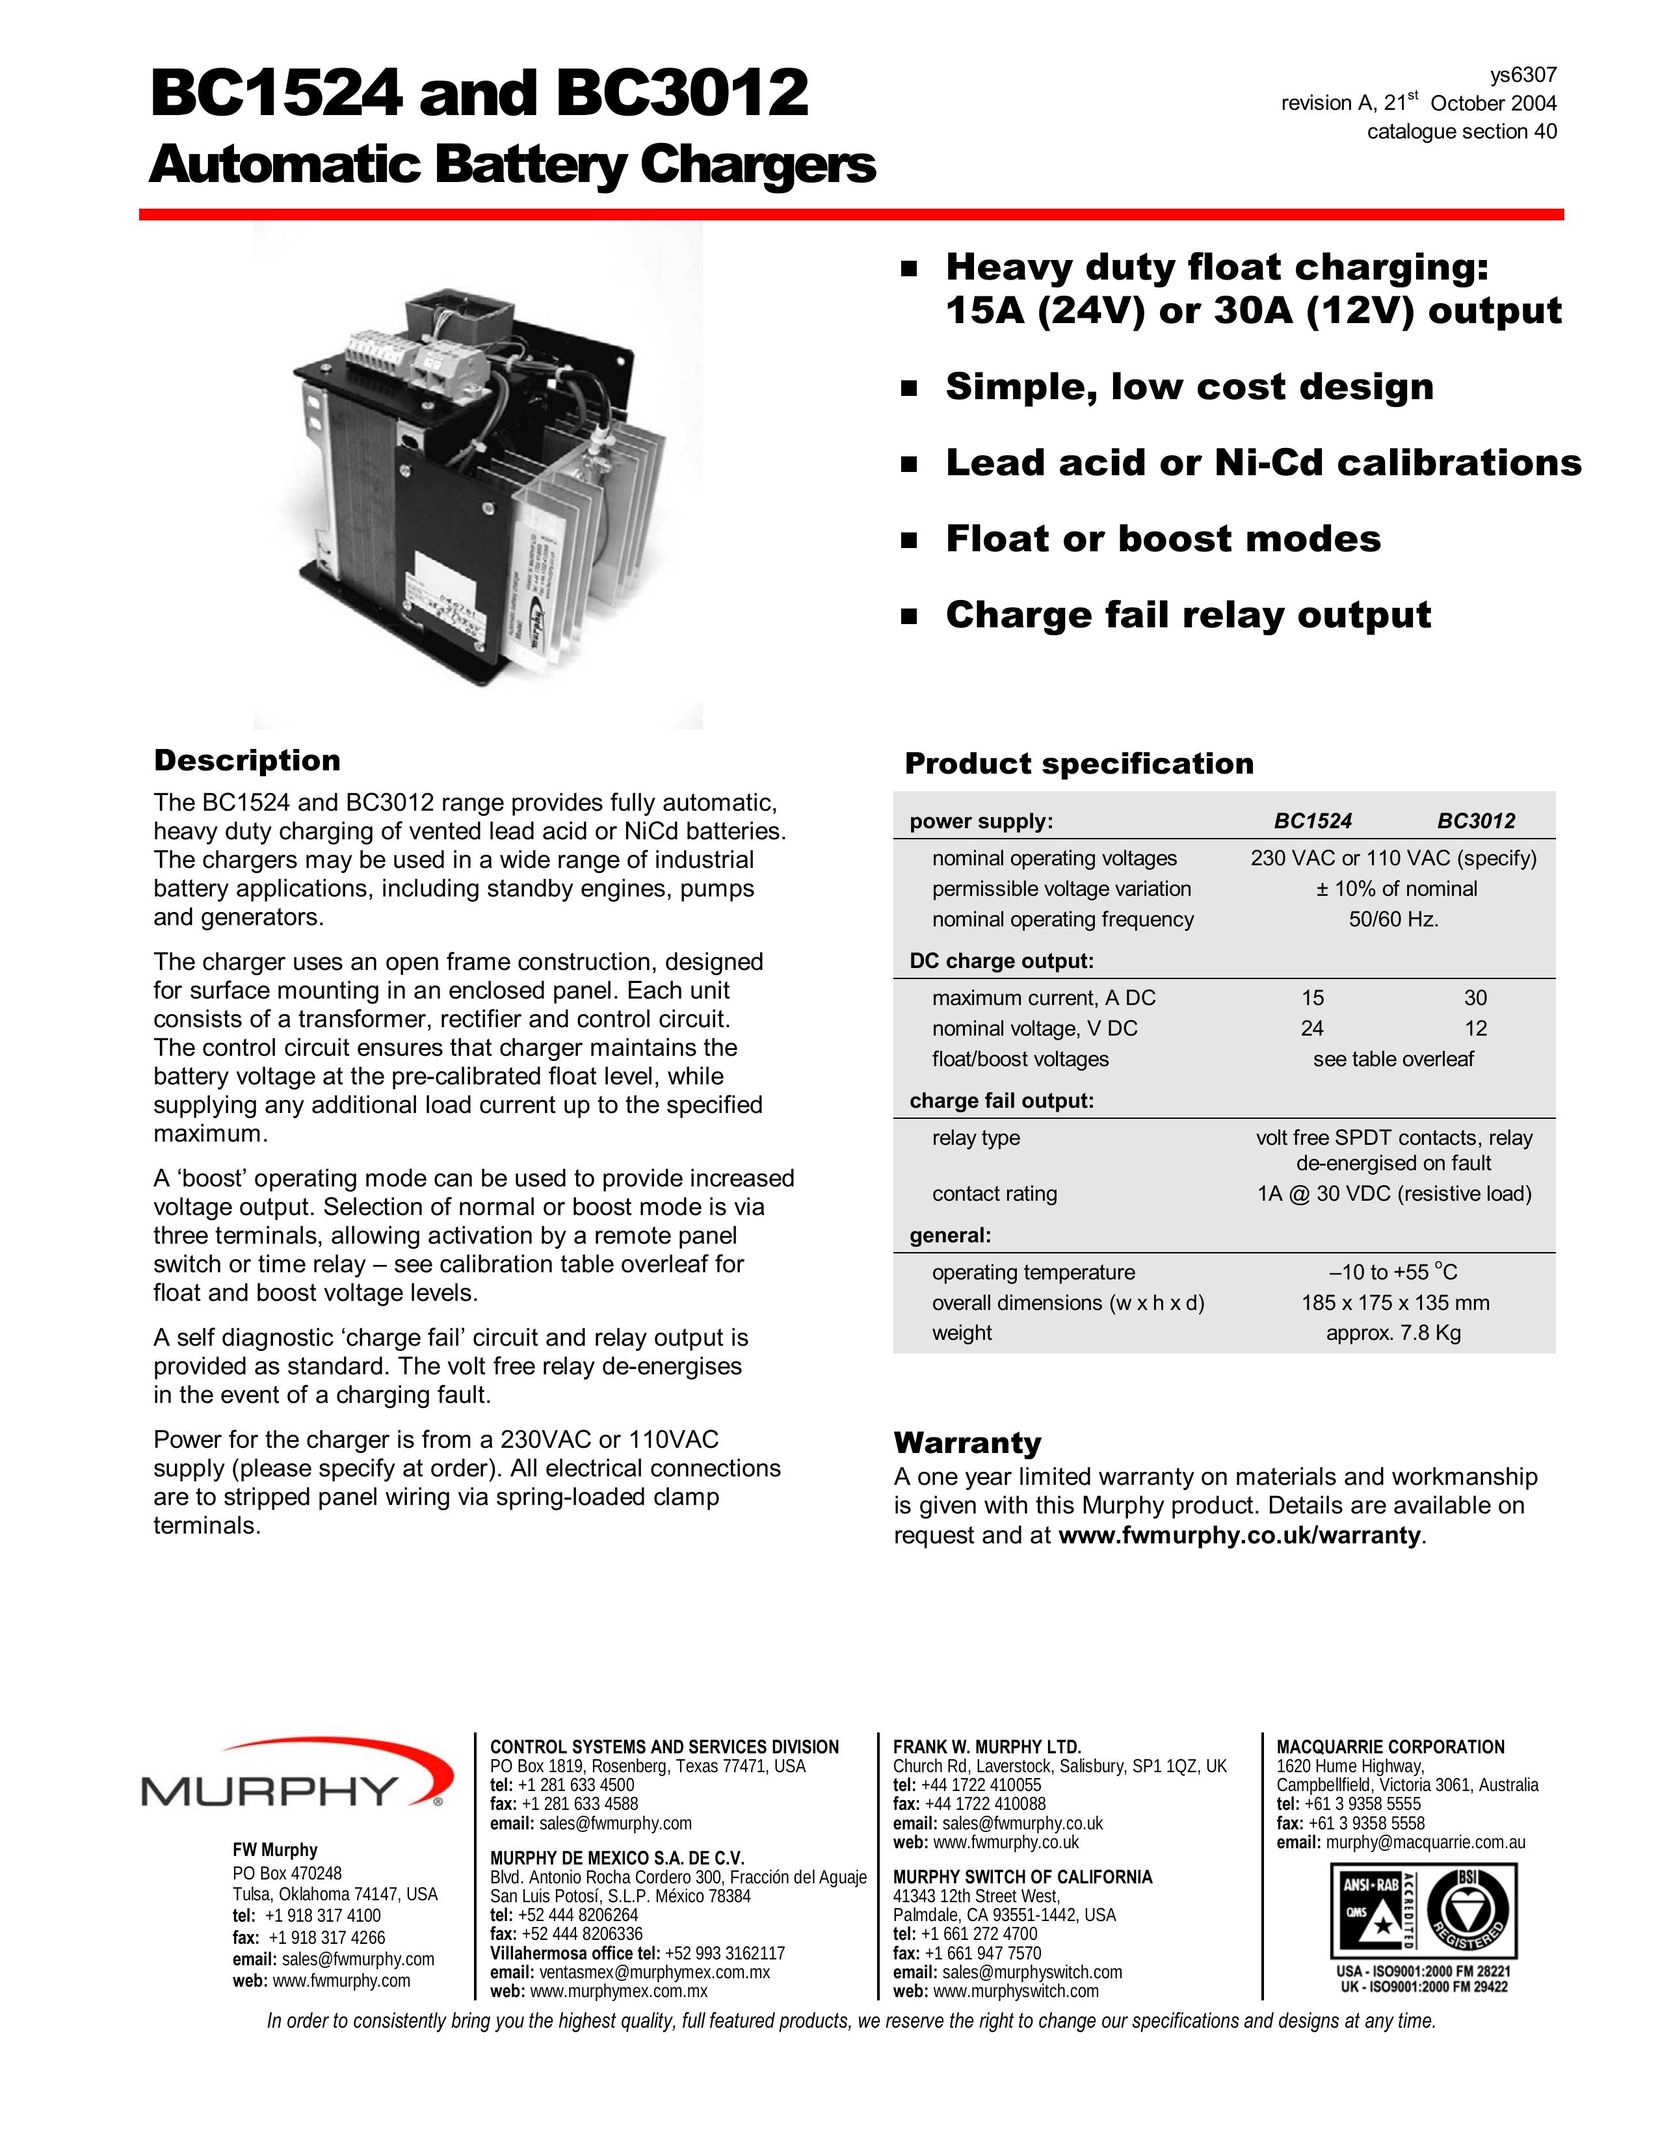 Murphy BC3012 Battery Charger User Manual